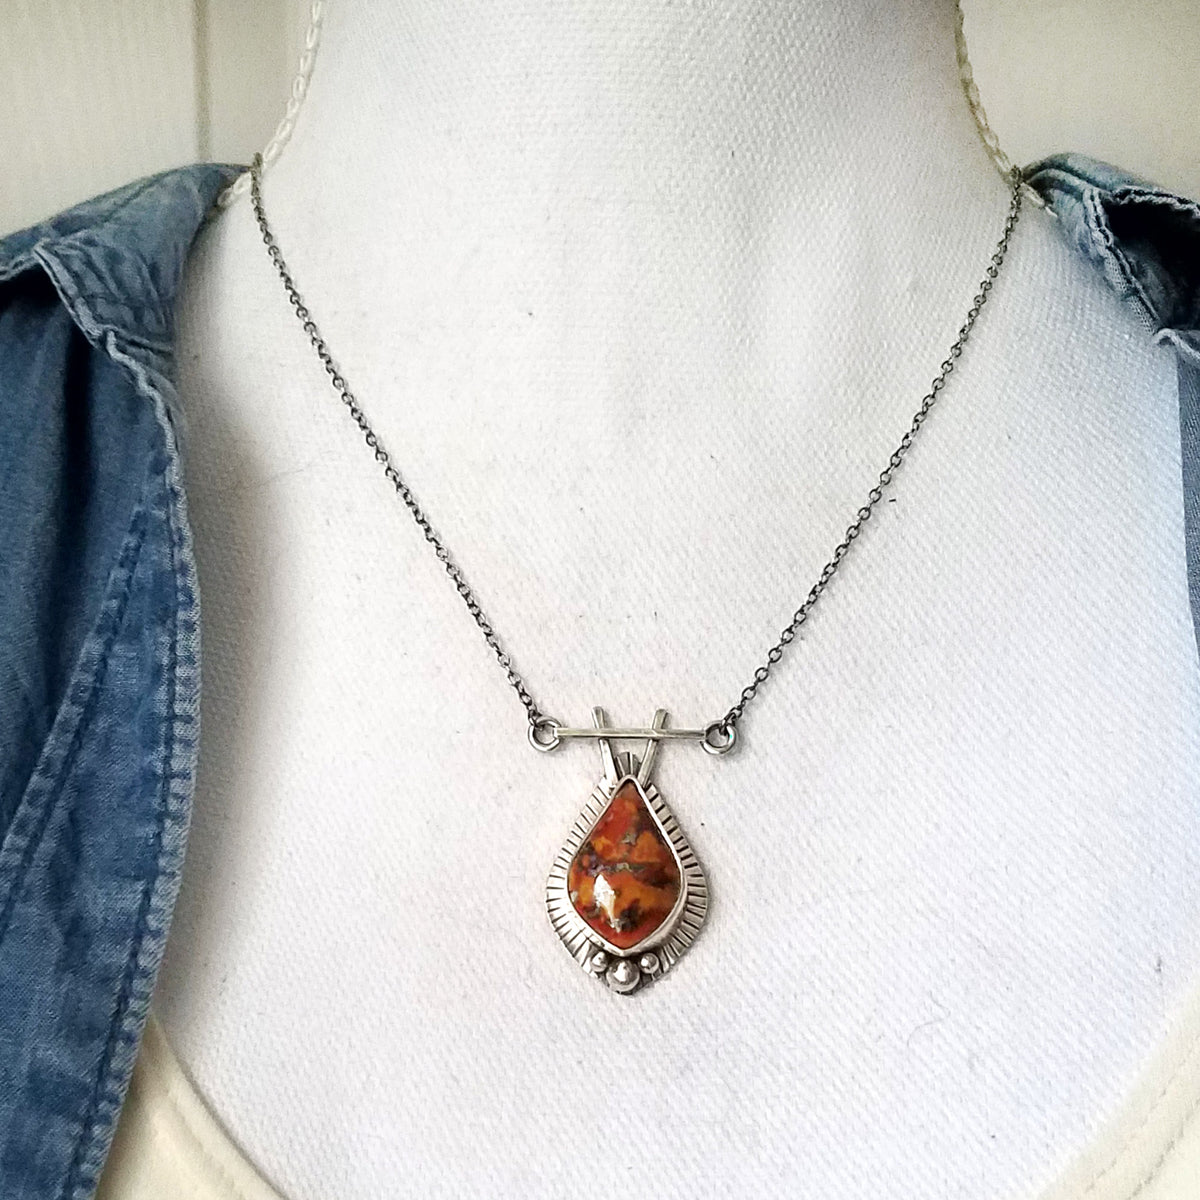 Moroccan Agate Necklace - A Twist of Whimsy